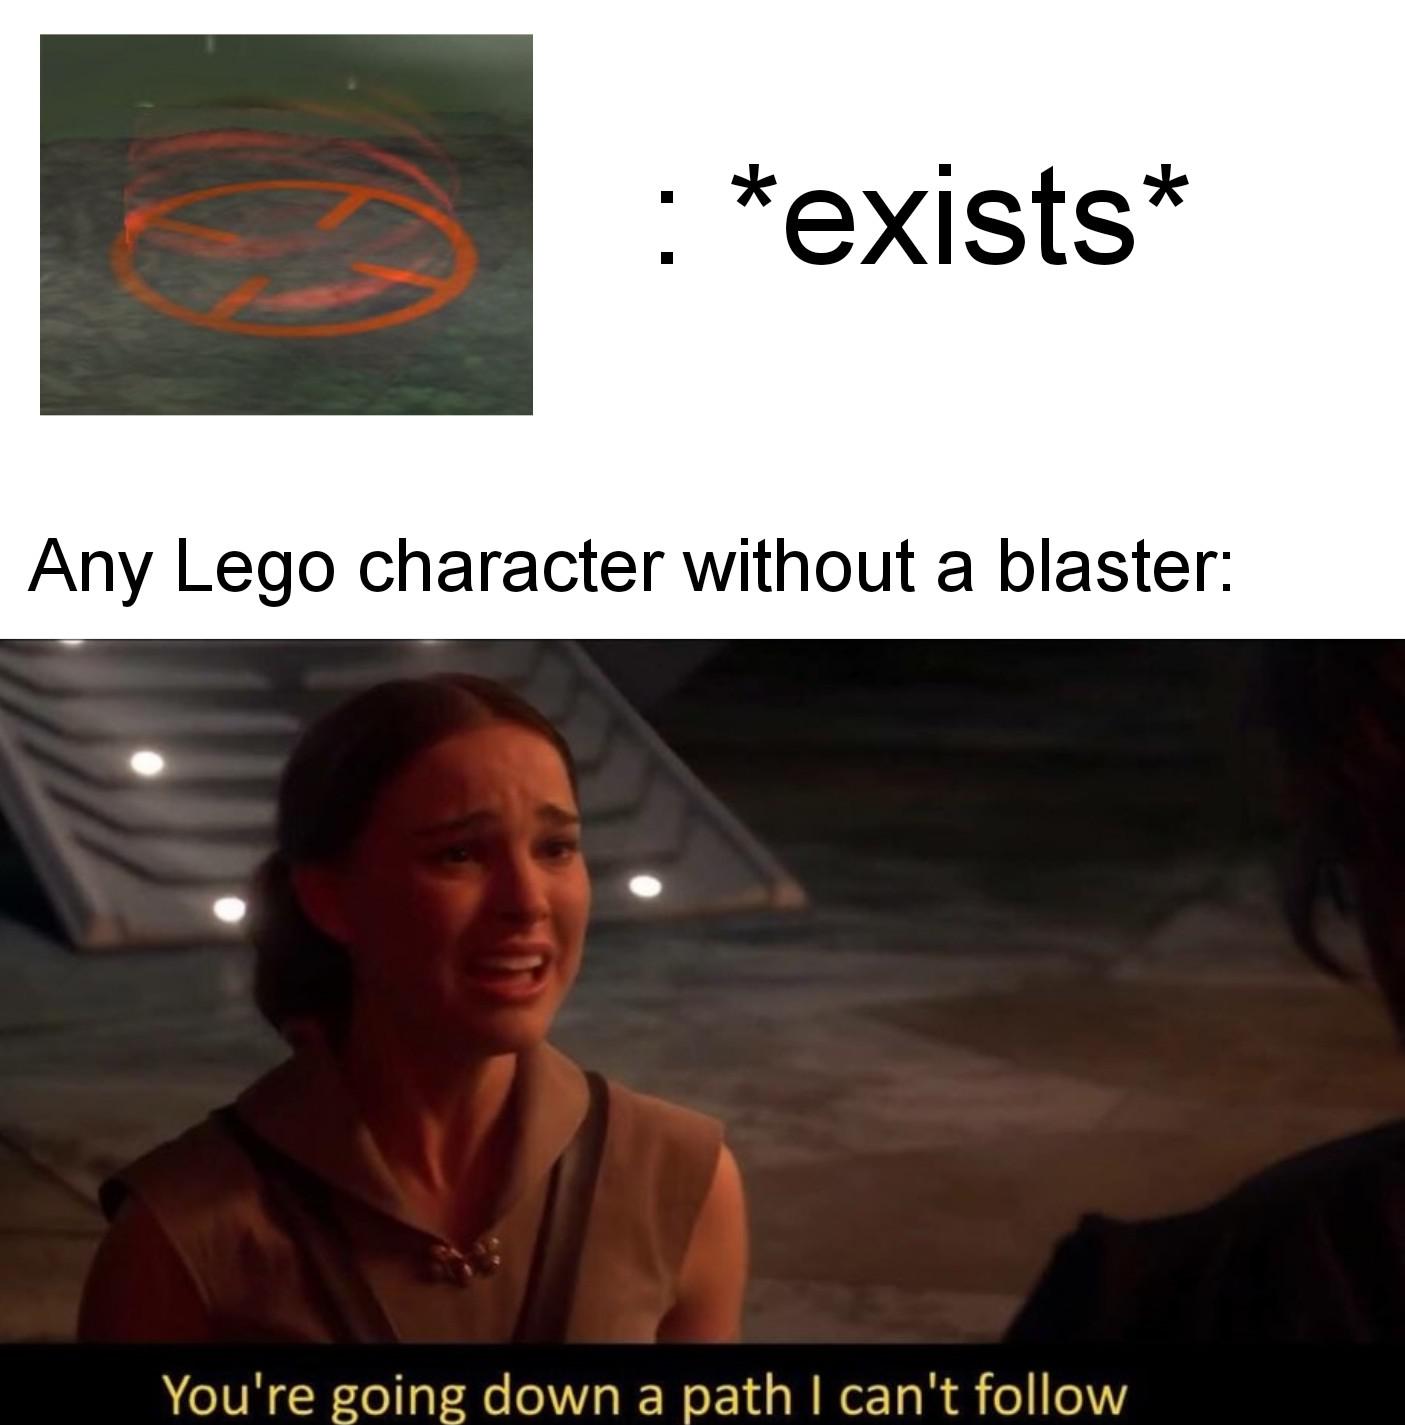 Lightsaber, TCS, ONK, LSW, Padme, Lego Star Wars Star Wars Memes Lightsaber, TCS, ONK, LSW, Padme, Lego Star Wars text: Any Lego character without a blaster: You're going down a path I can't follow 